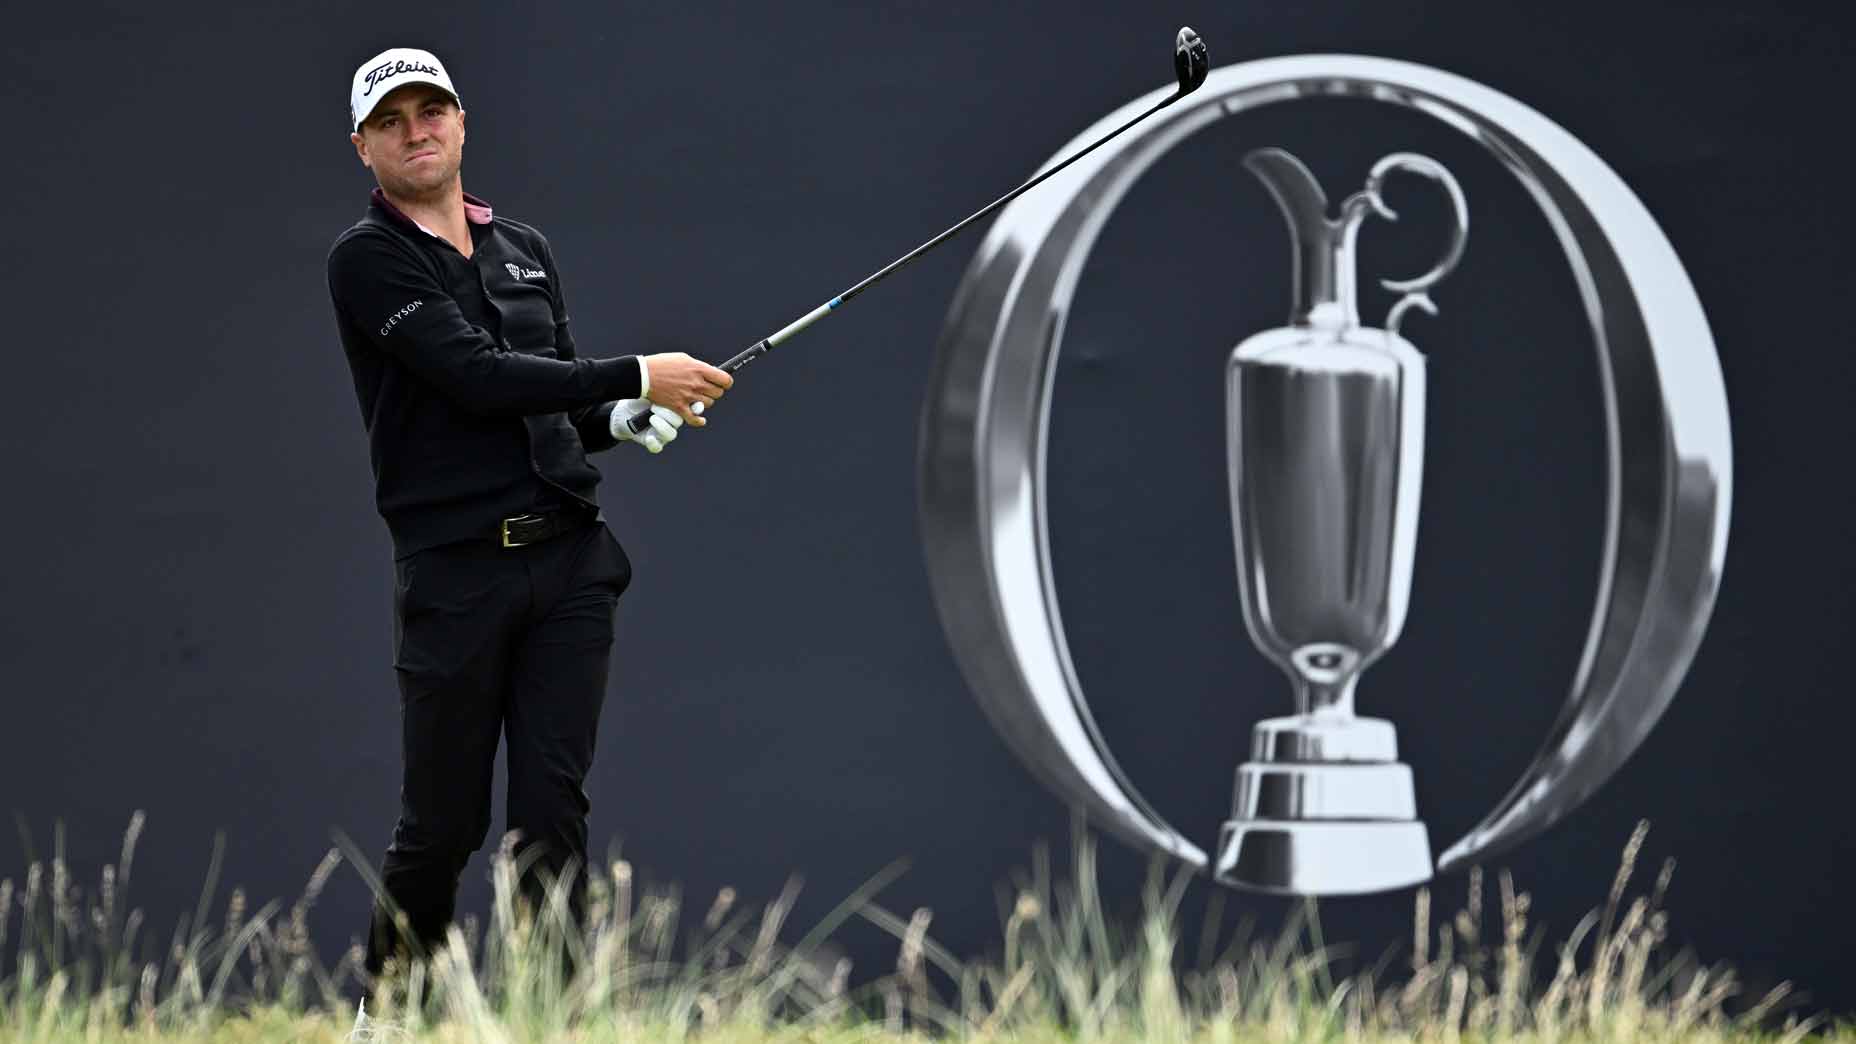 Open Championship projected cut Big names could be headed home early